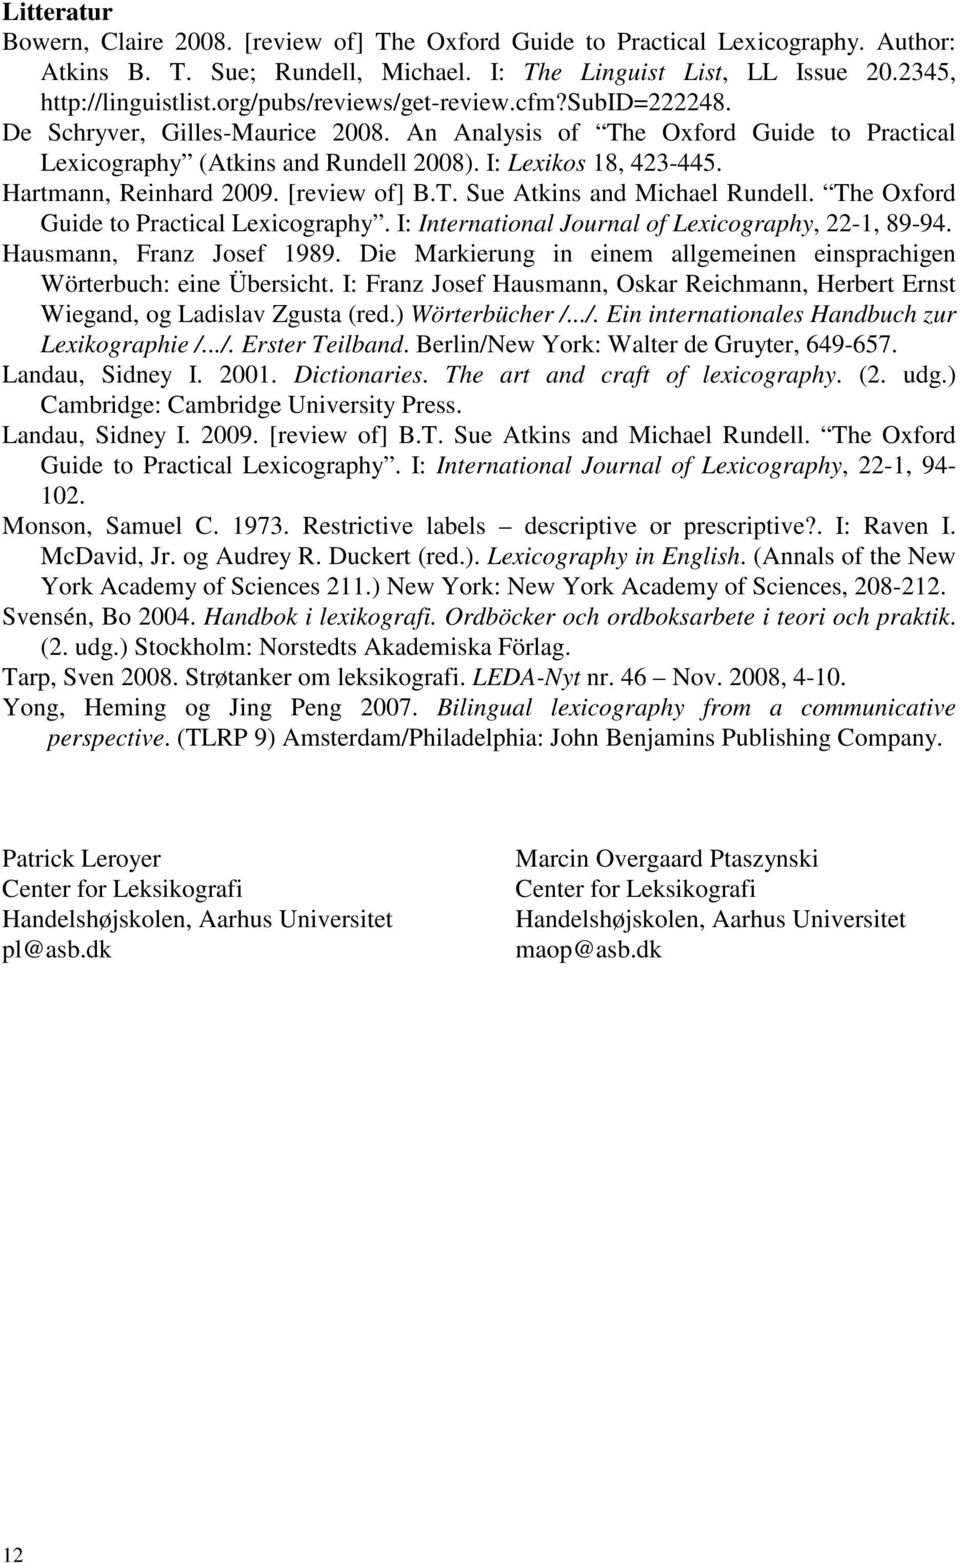 Hartmann, Reinhard 2009. [review of] B.T. Sue Atkins and Michael Rundell. The Oxford Guide to Practical Lexicography. I: International Journal of Lexicography, 22-1, 89-94. Hausmann, Franz Josef 1989.